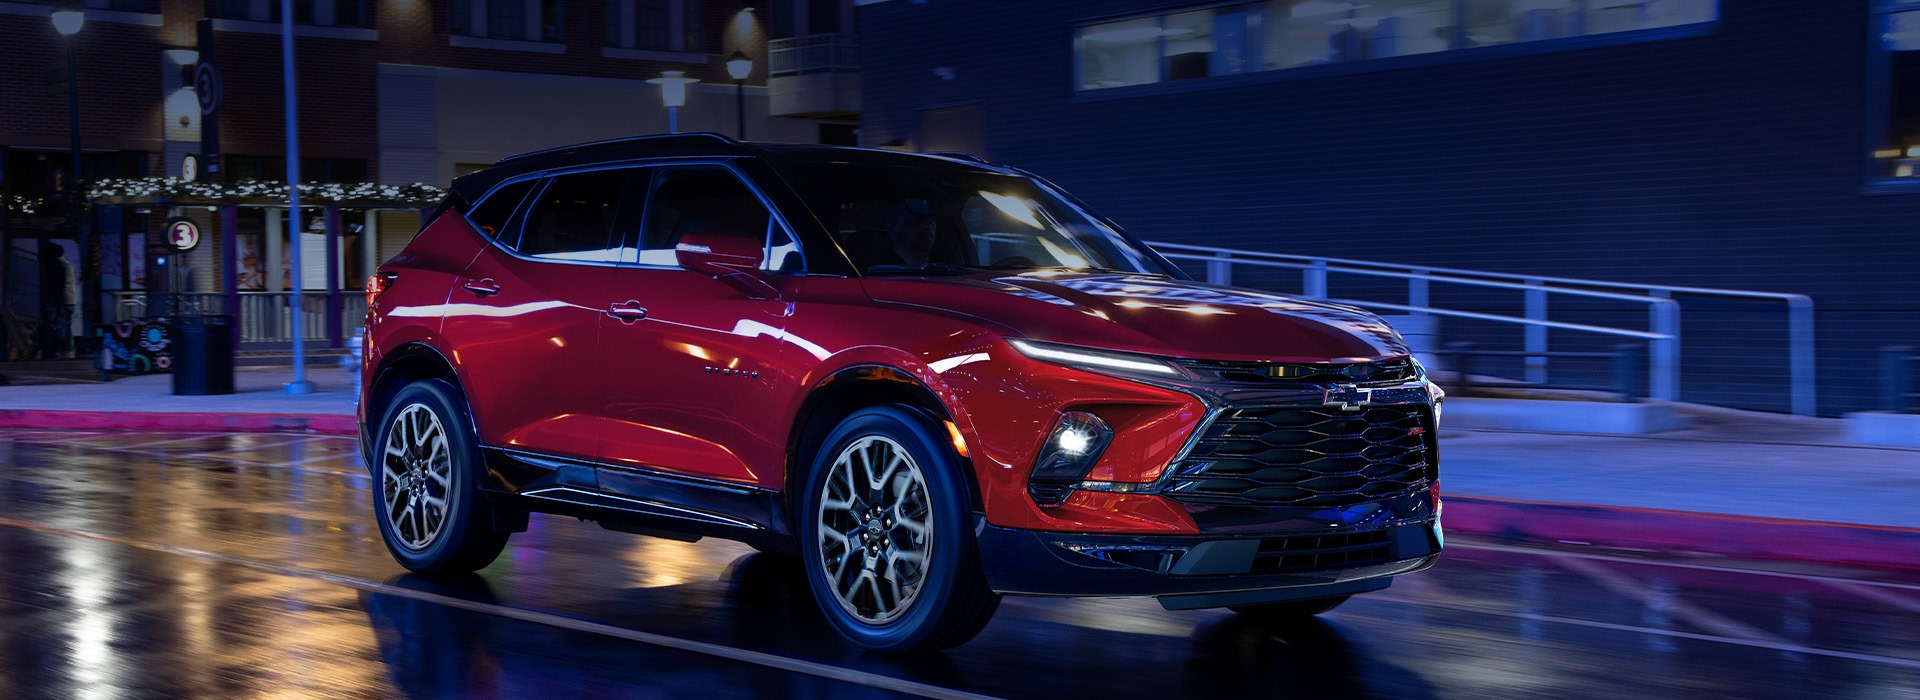 Chevy Electric Blazer SUV | Review | Valley Chevy